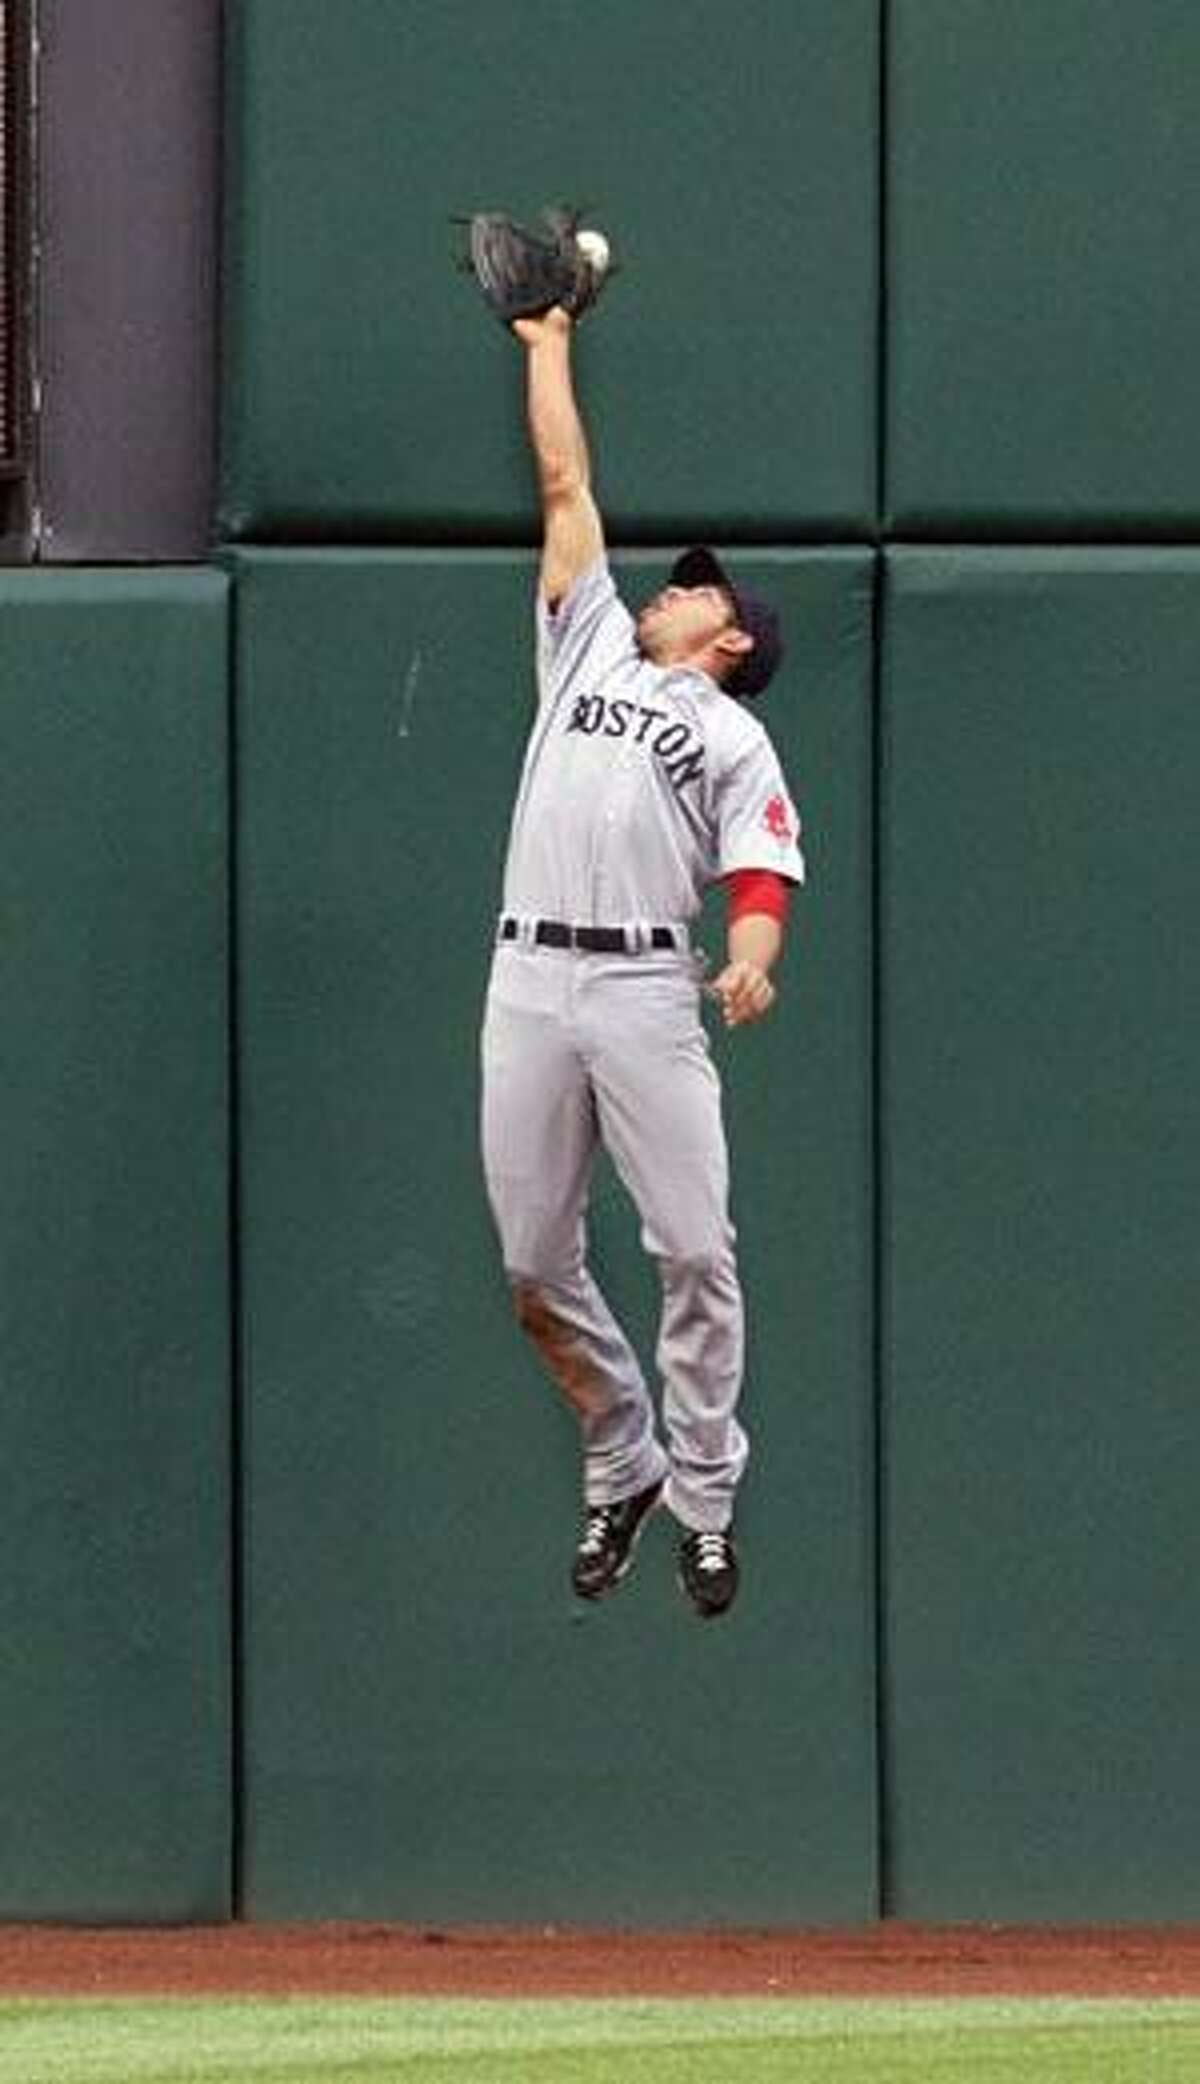 Boston Red Sox outfielder Jacoby Ellsbury jumps for a ball hit by Cleveland Indians' Victor Martinez during the first inning Wednesday in Cleveland. Martinez tripled and Asdrubal Cabrera scored on the play.